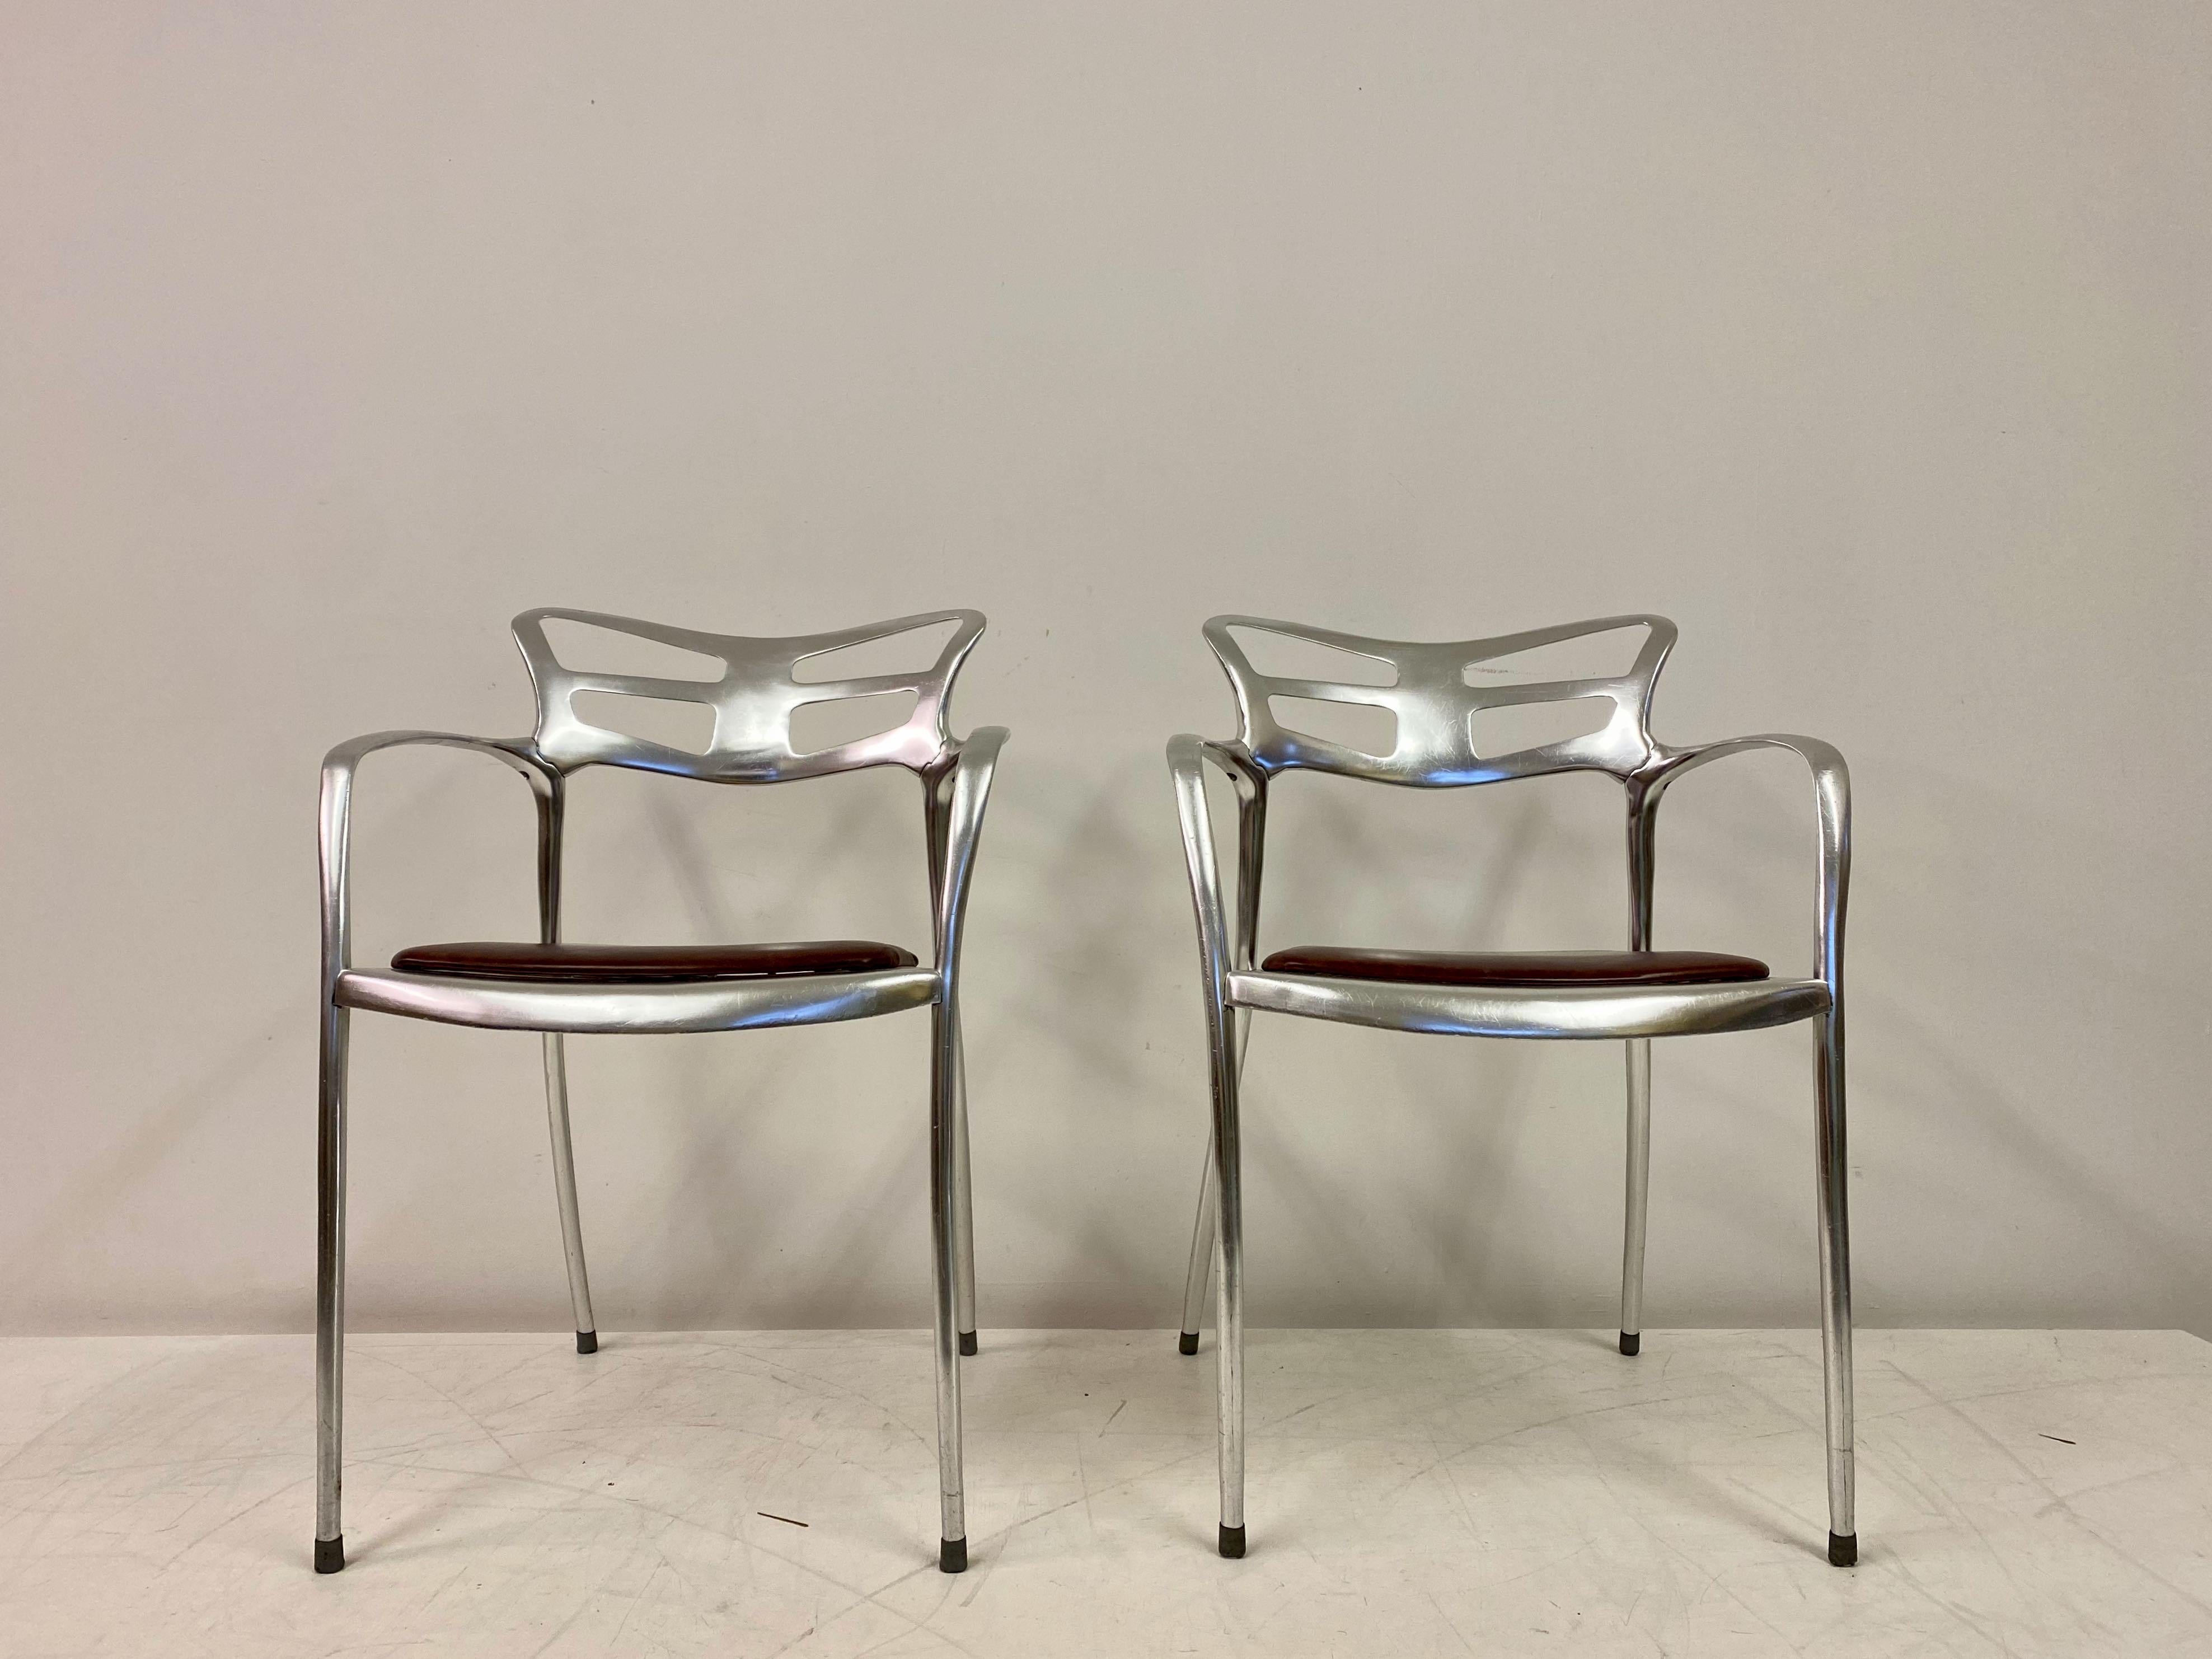 Pair of armchairs

Cast aluminium frames 

Leather seats

Similar to Jorge Pensi's Toledo chairs

Seat height 47cm

1980s.